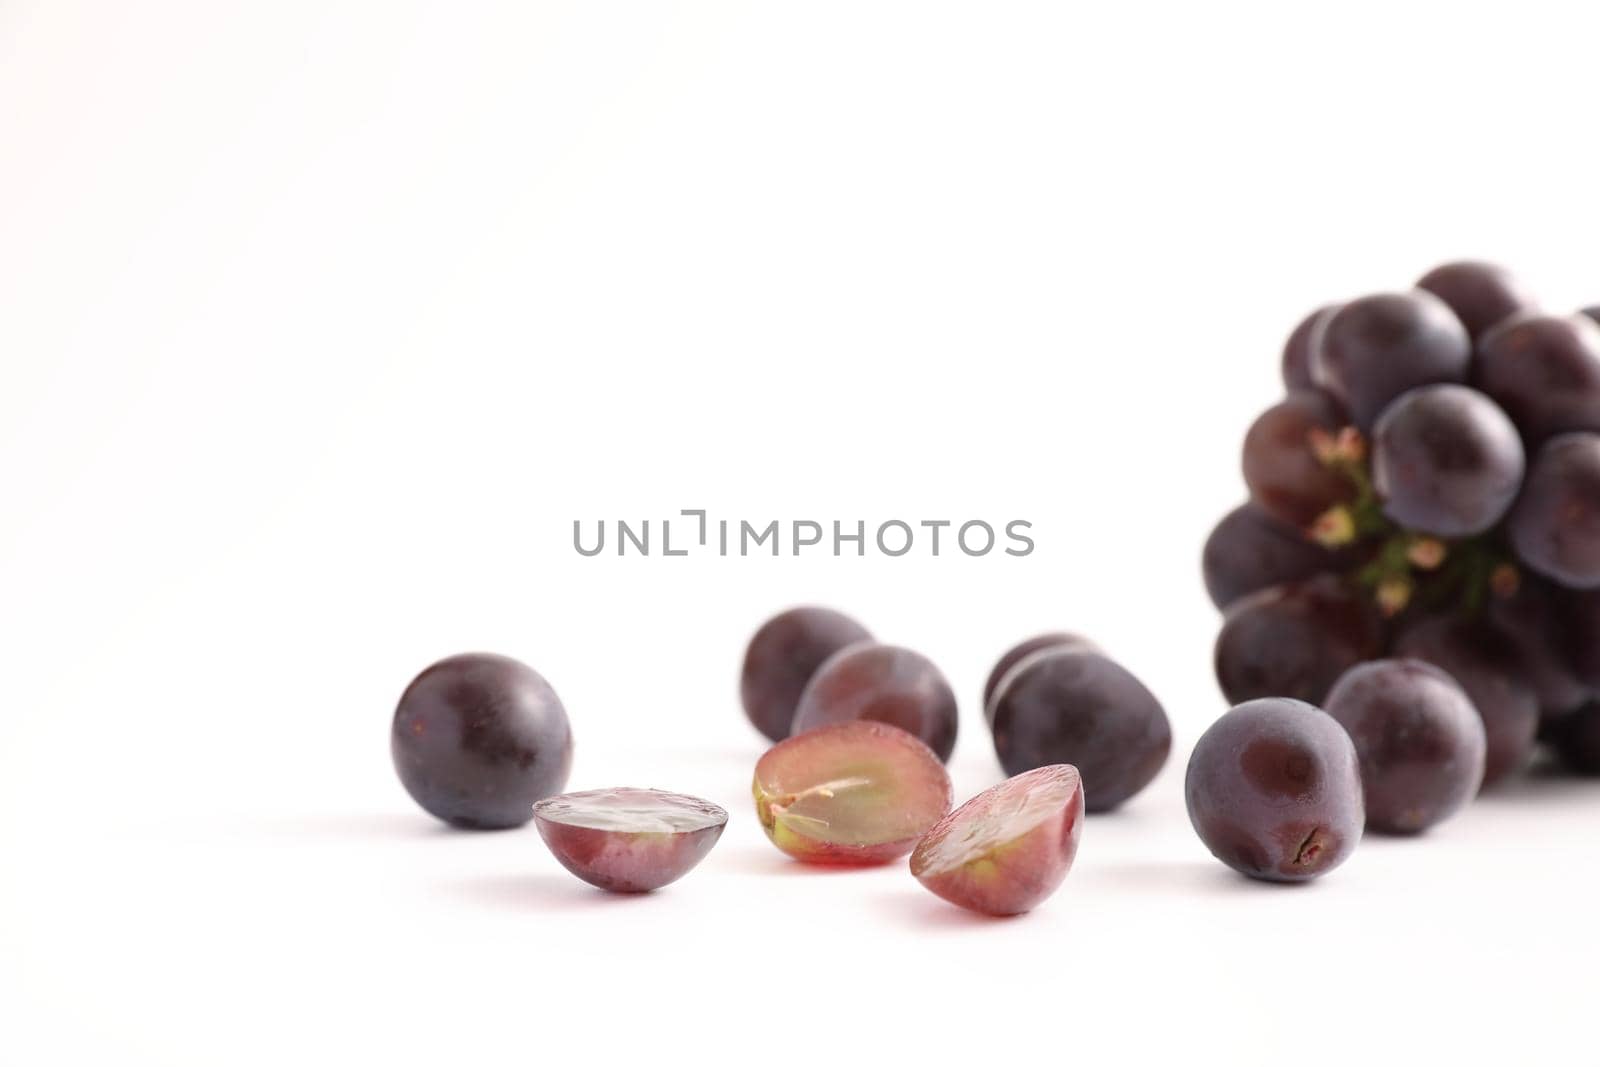 Red grapes isolated in white background by piyato